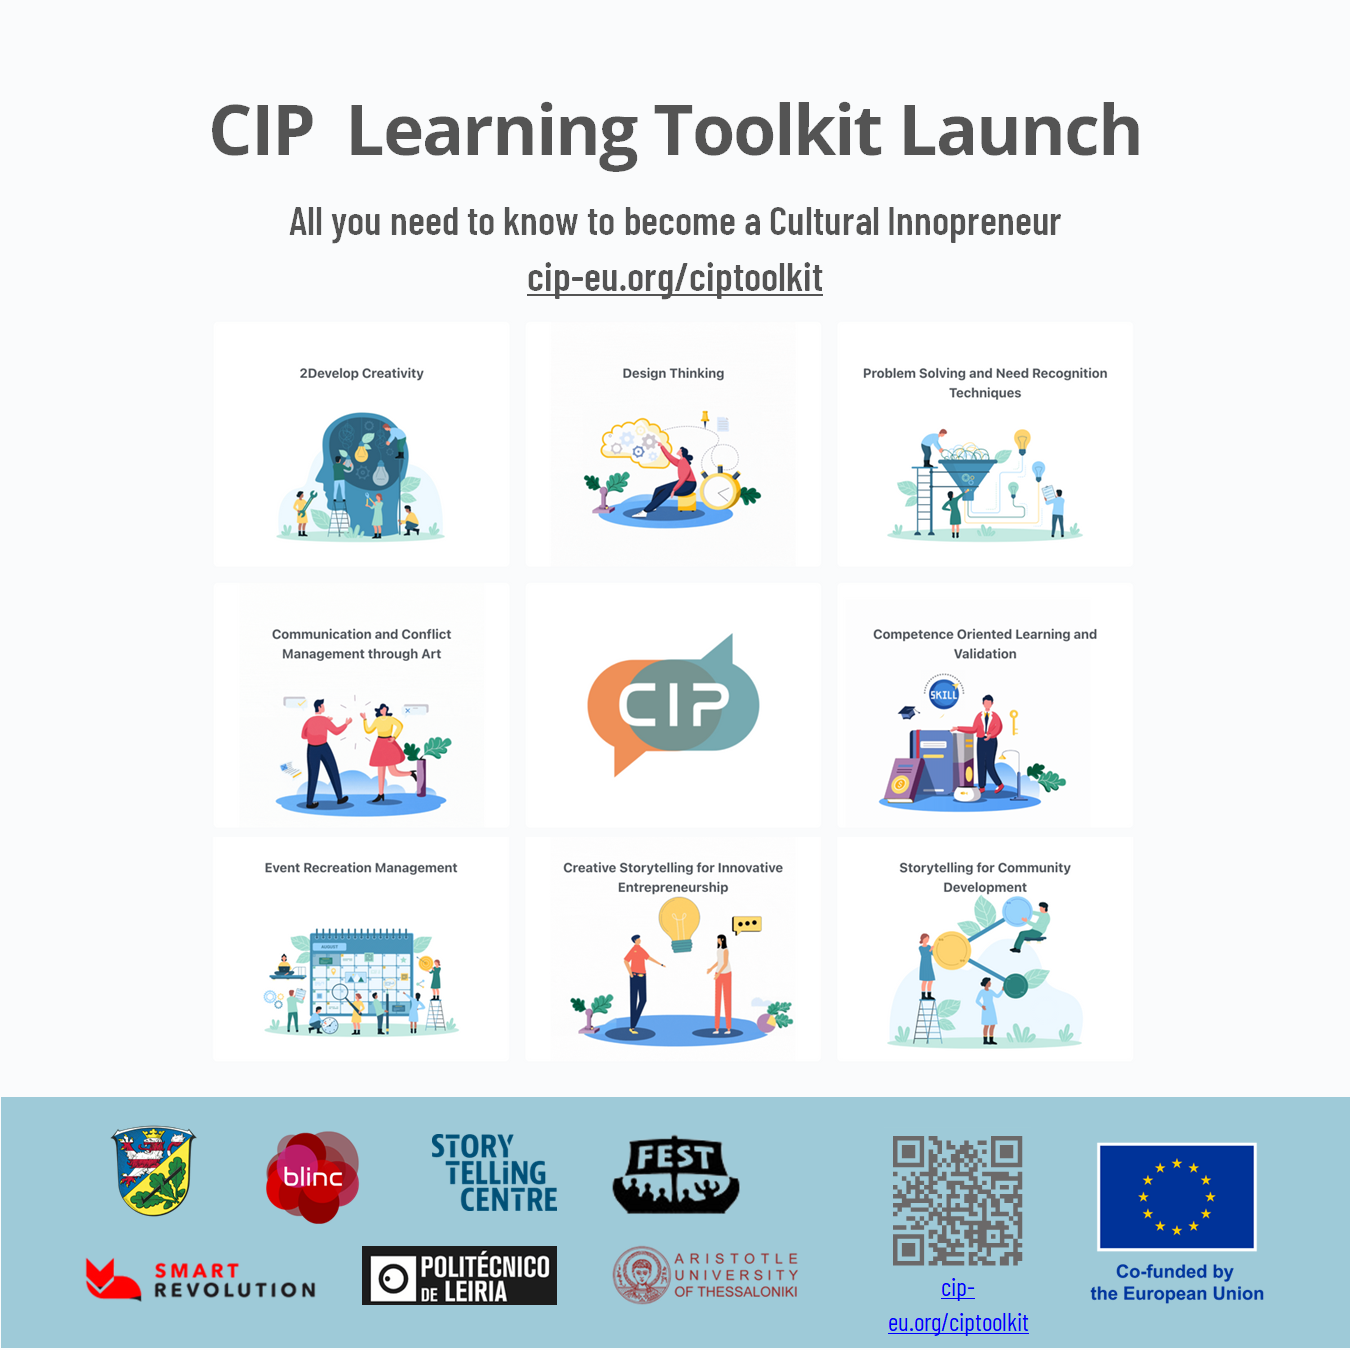 CIP Learning Toolkit